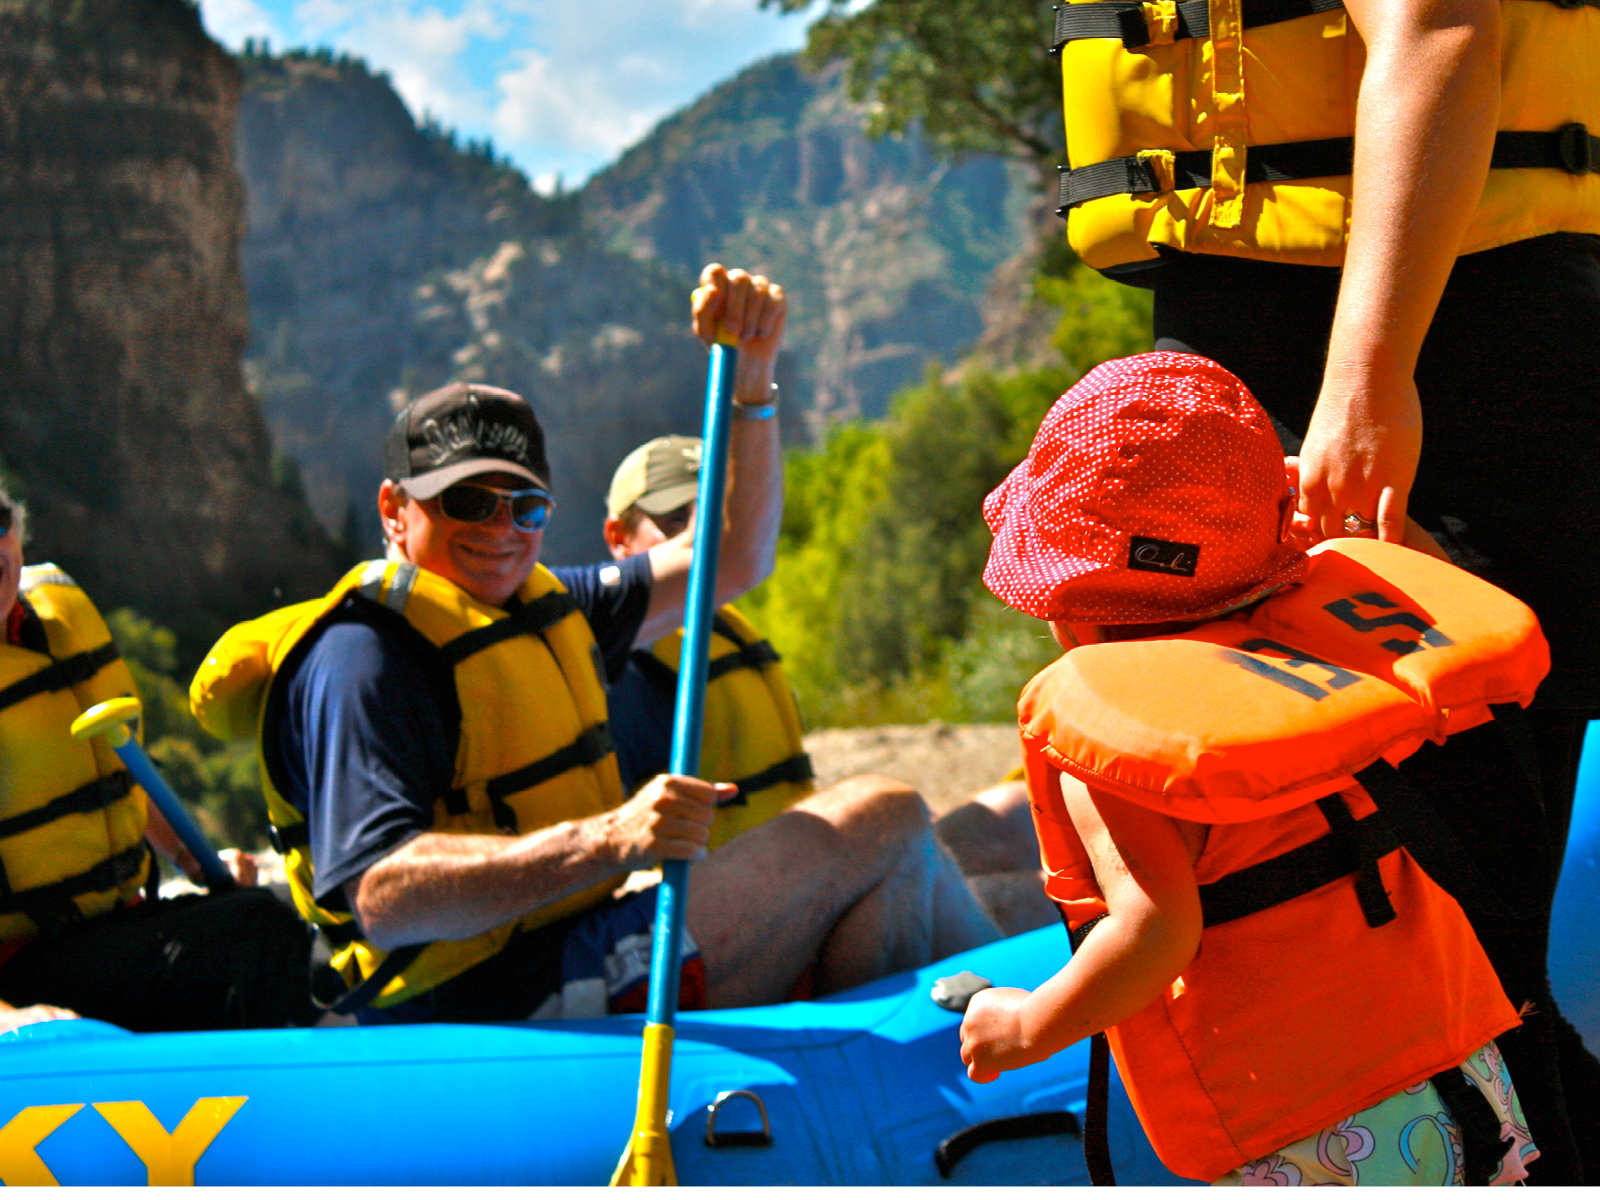 In this photo, a young child and her mother hold hands and greet a boat of rafters at Grizzly Creek beach. They all wear bright colored safety gear and hats.